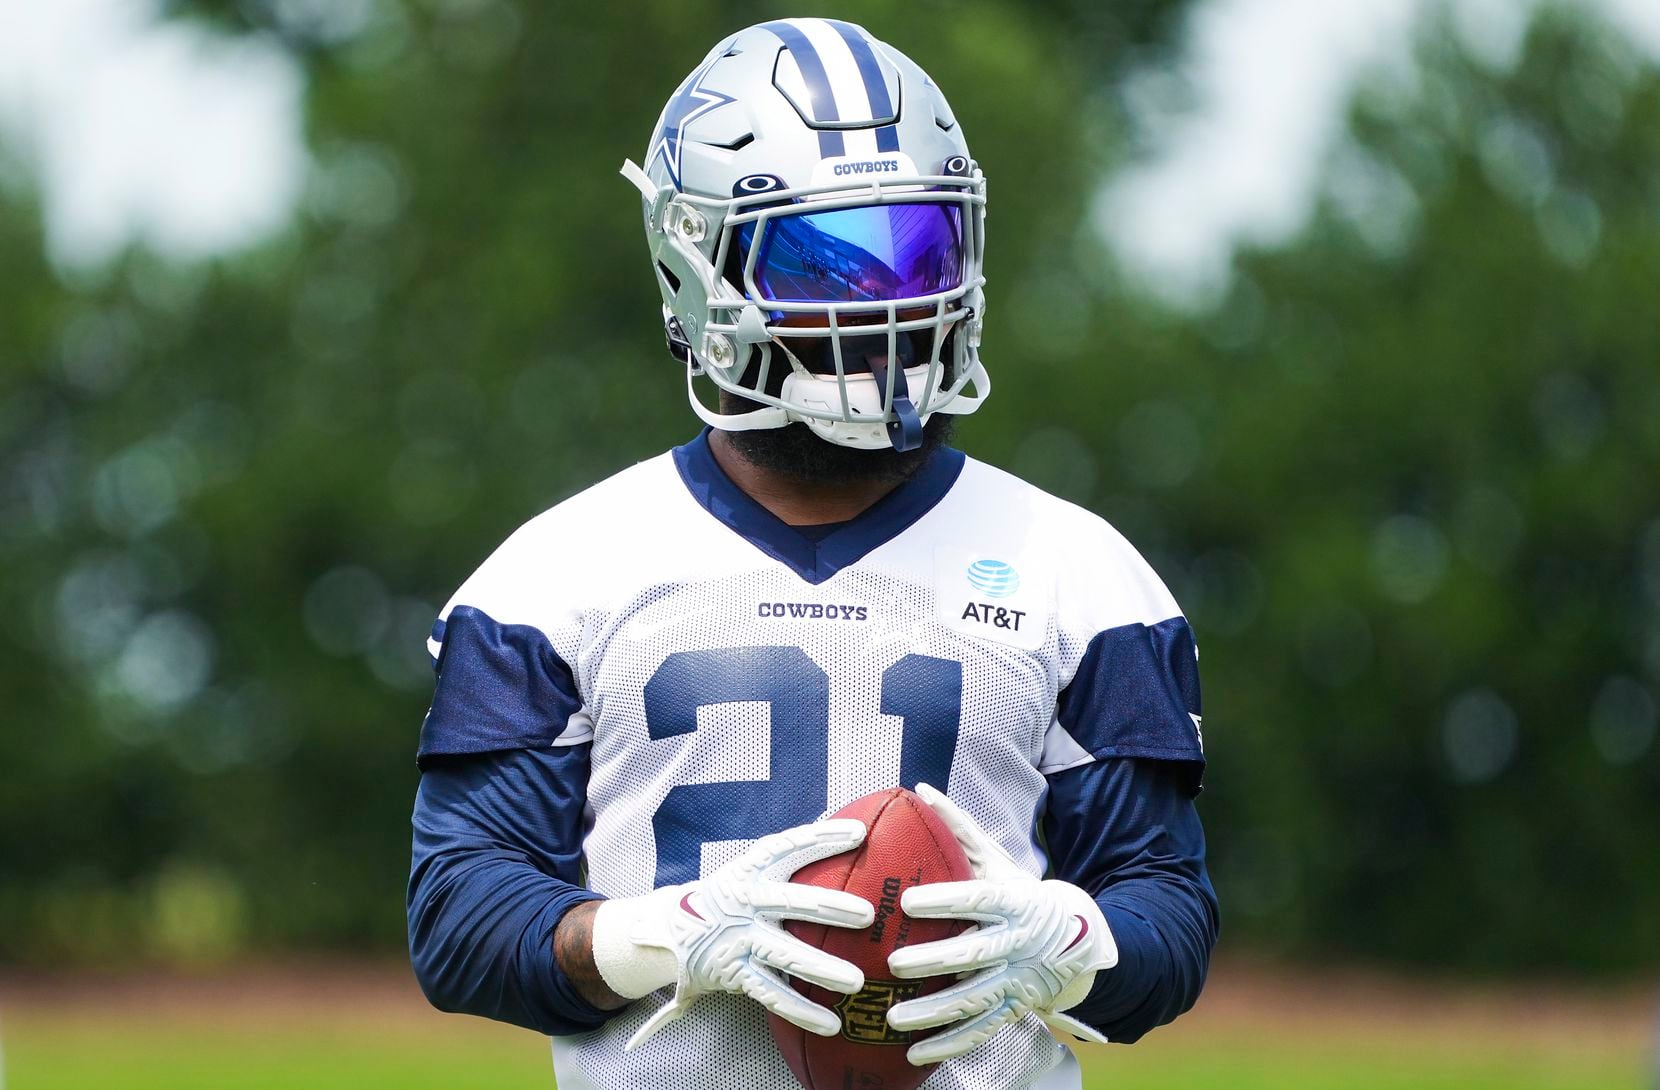 Dallas Cowboys running back Ezekiel Elliott pauses between drills during a minicamp practice at The Star on Tuesday, June 8, 2021, in Frisco. (Smiley N. Pool/The Dallas Morning News)